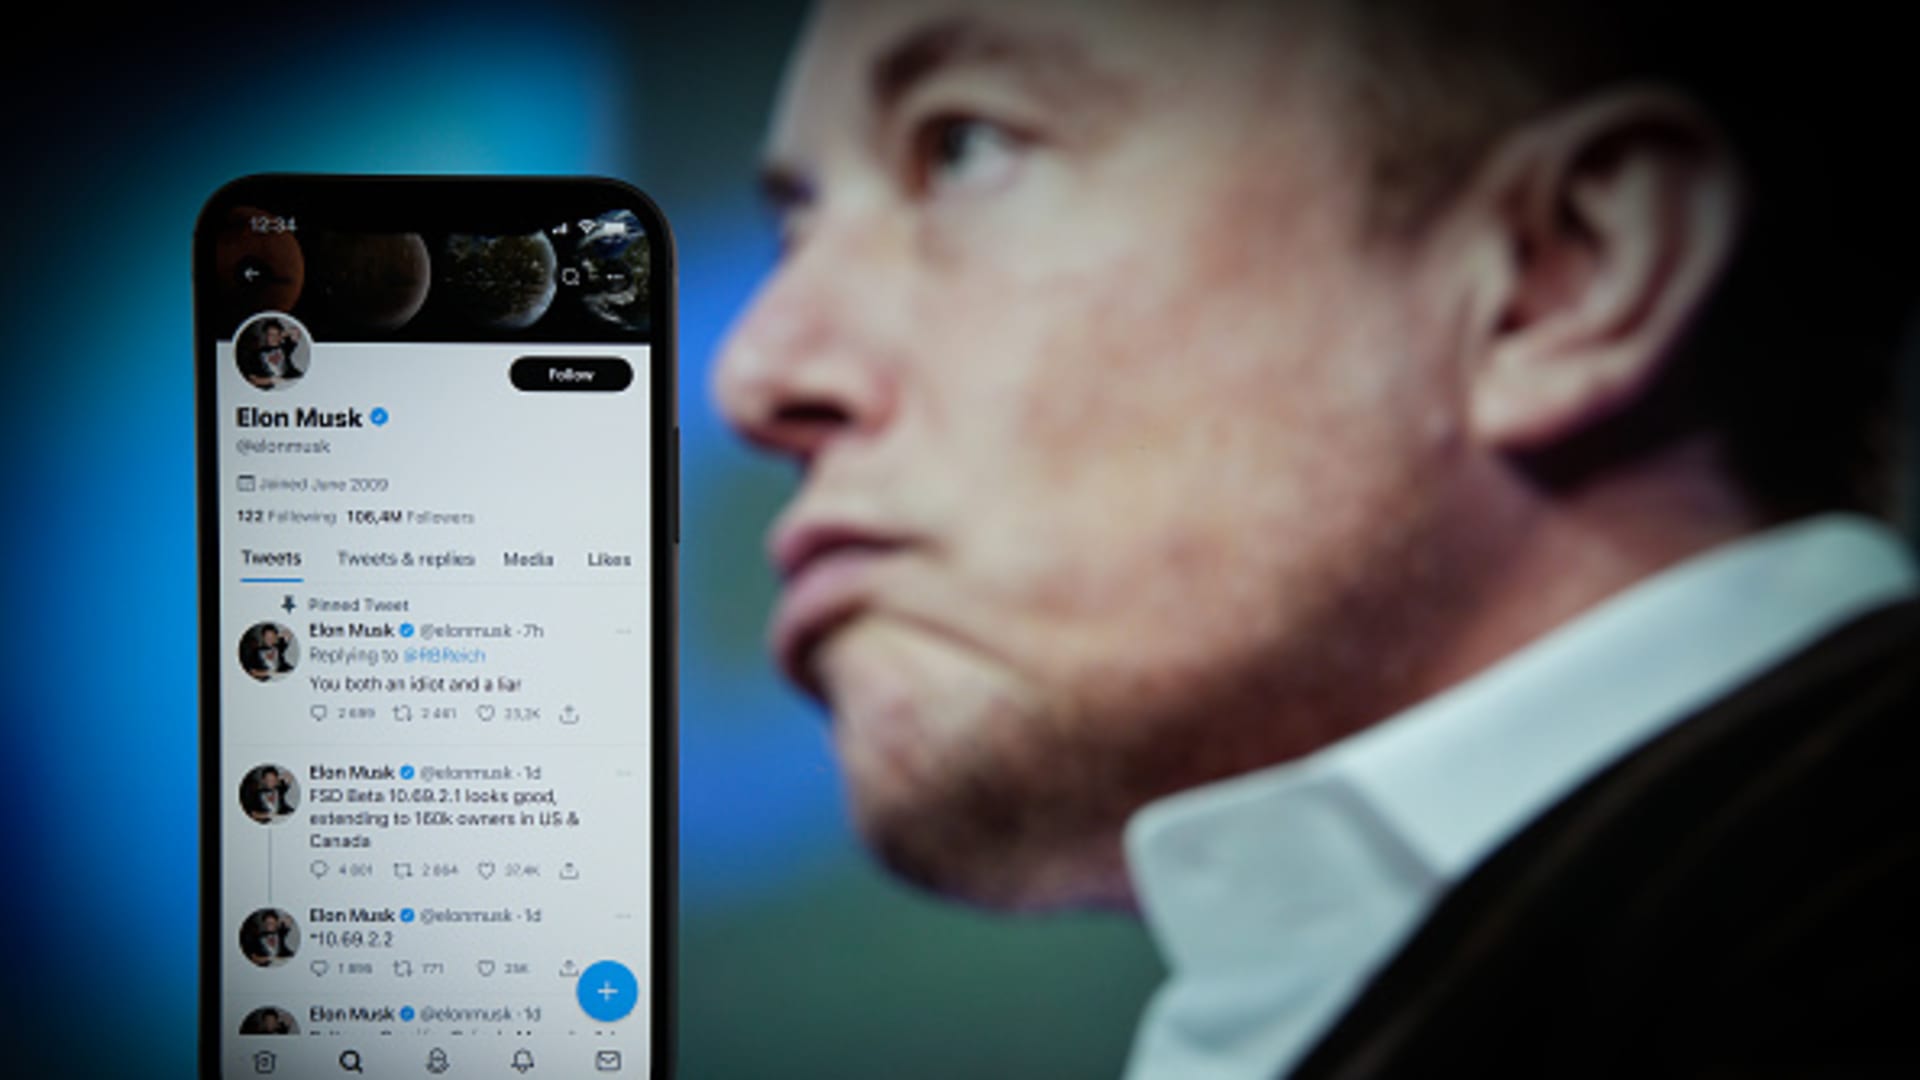 Twitter cut more than 950 California employees after Elon Musk took over, WARN notice shows